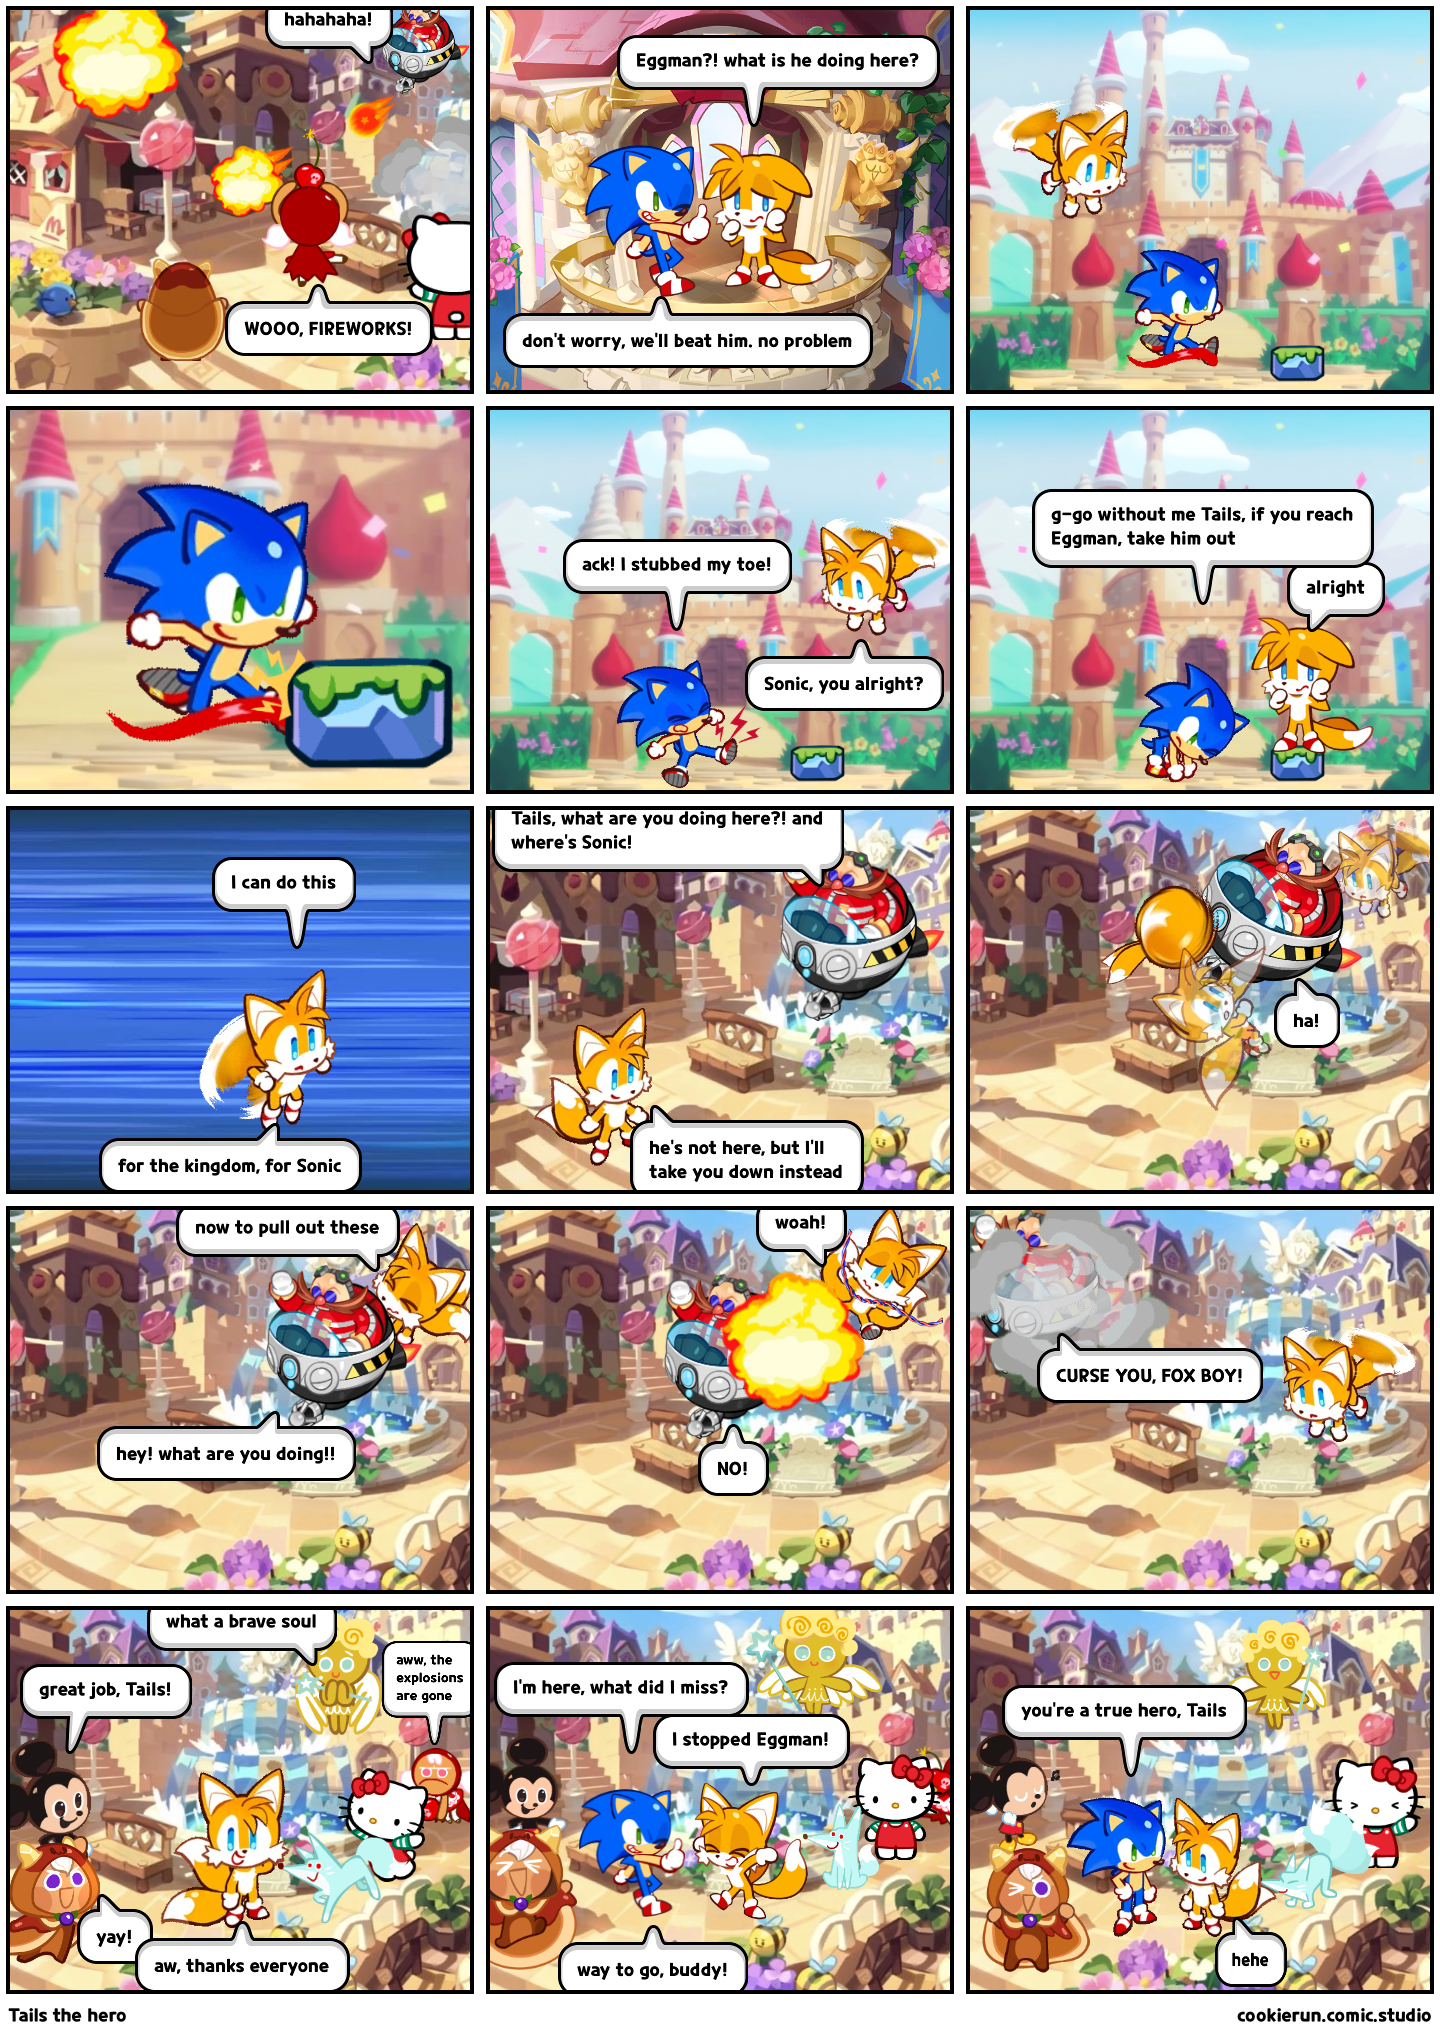 Tails the hero